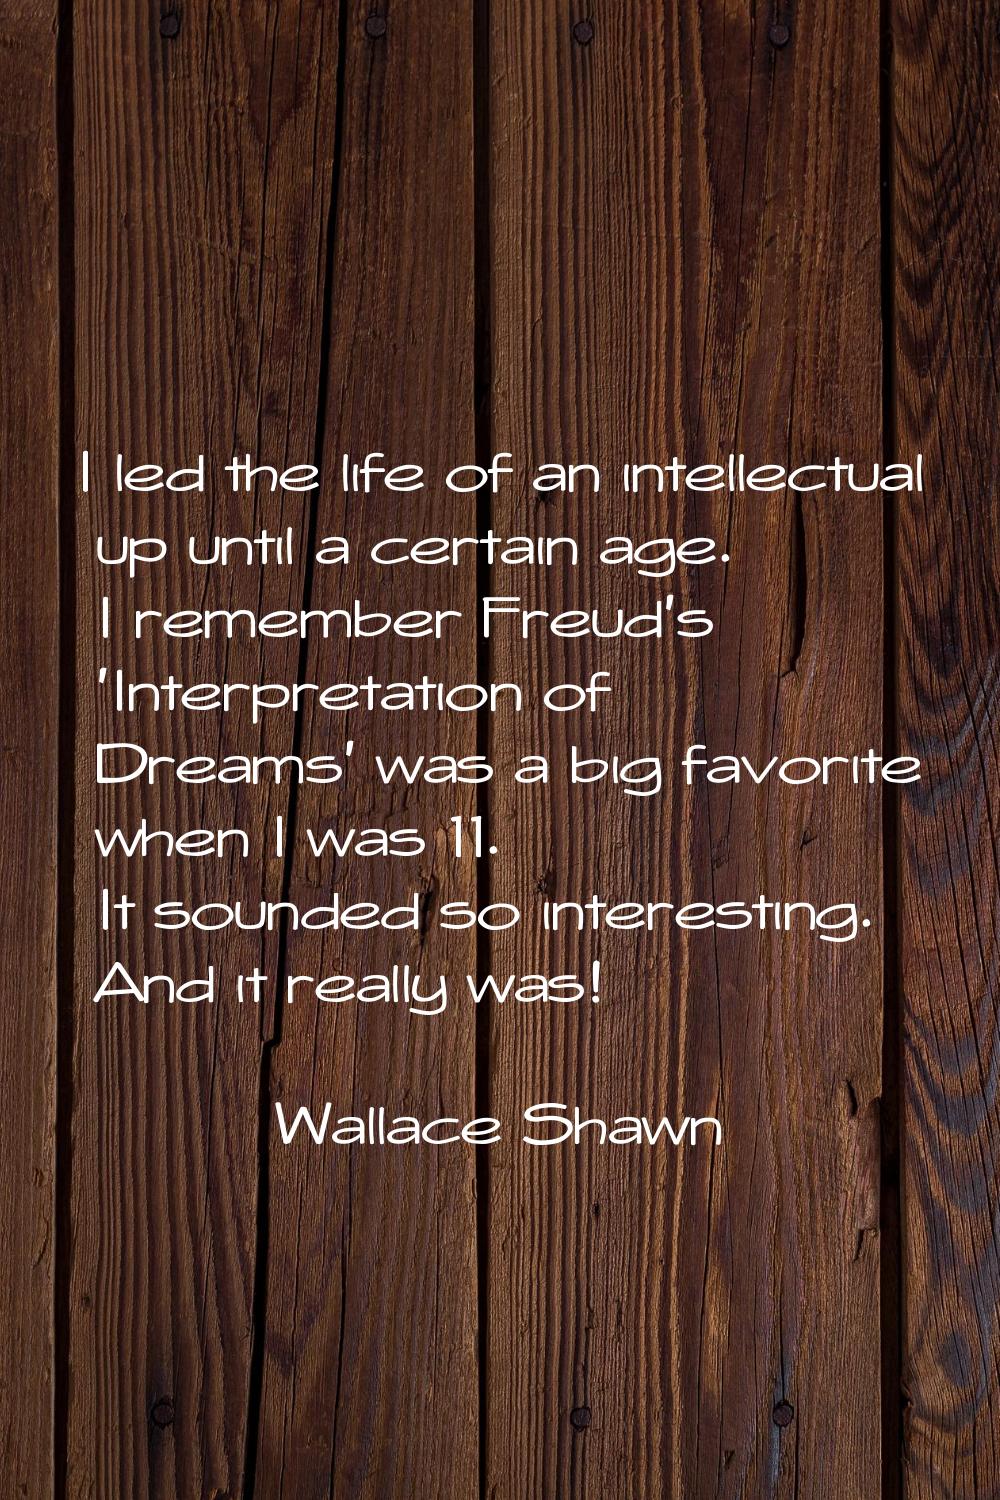 I led the life of an intellectual up until a certain age. I remember Freud's 'Interpretation of Dre